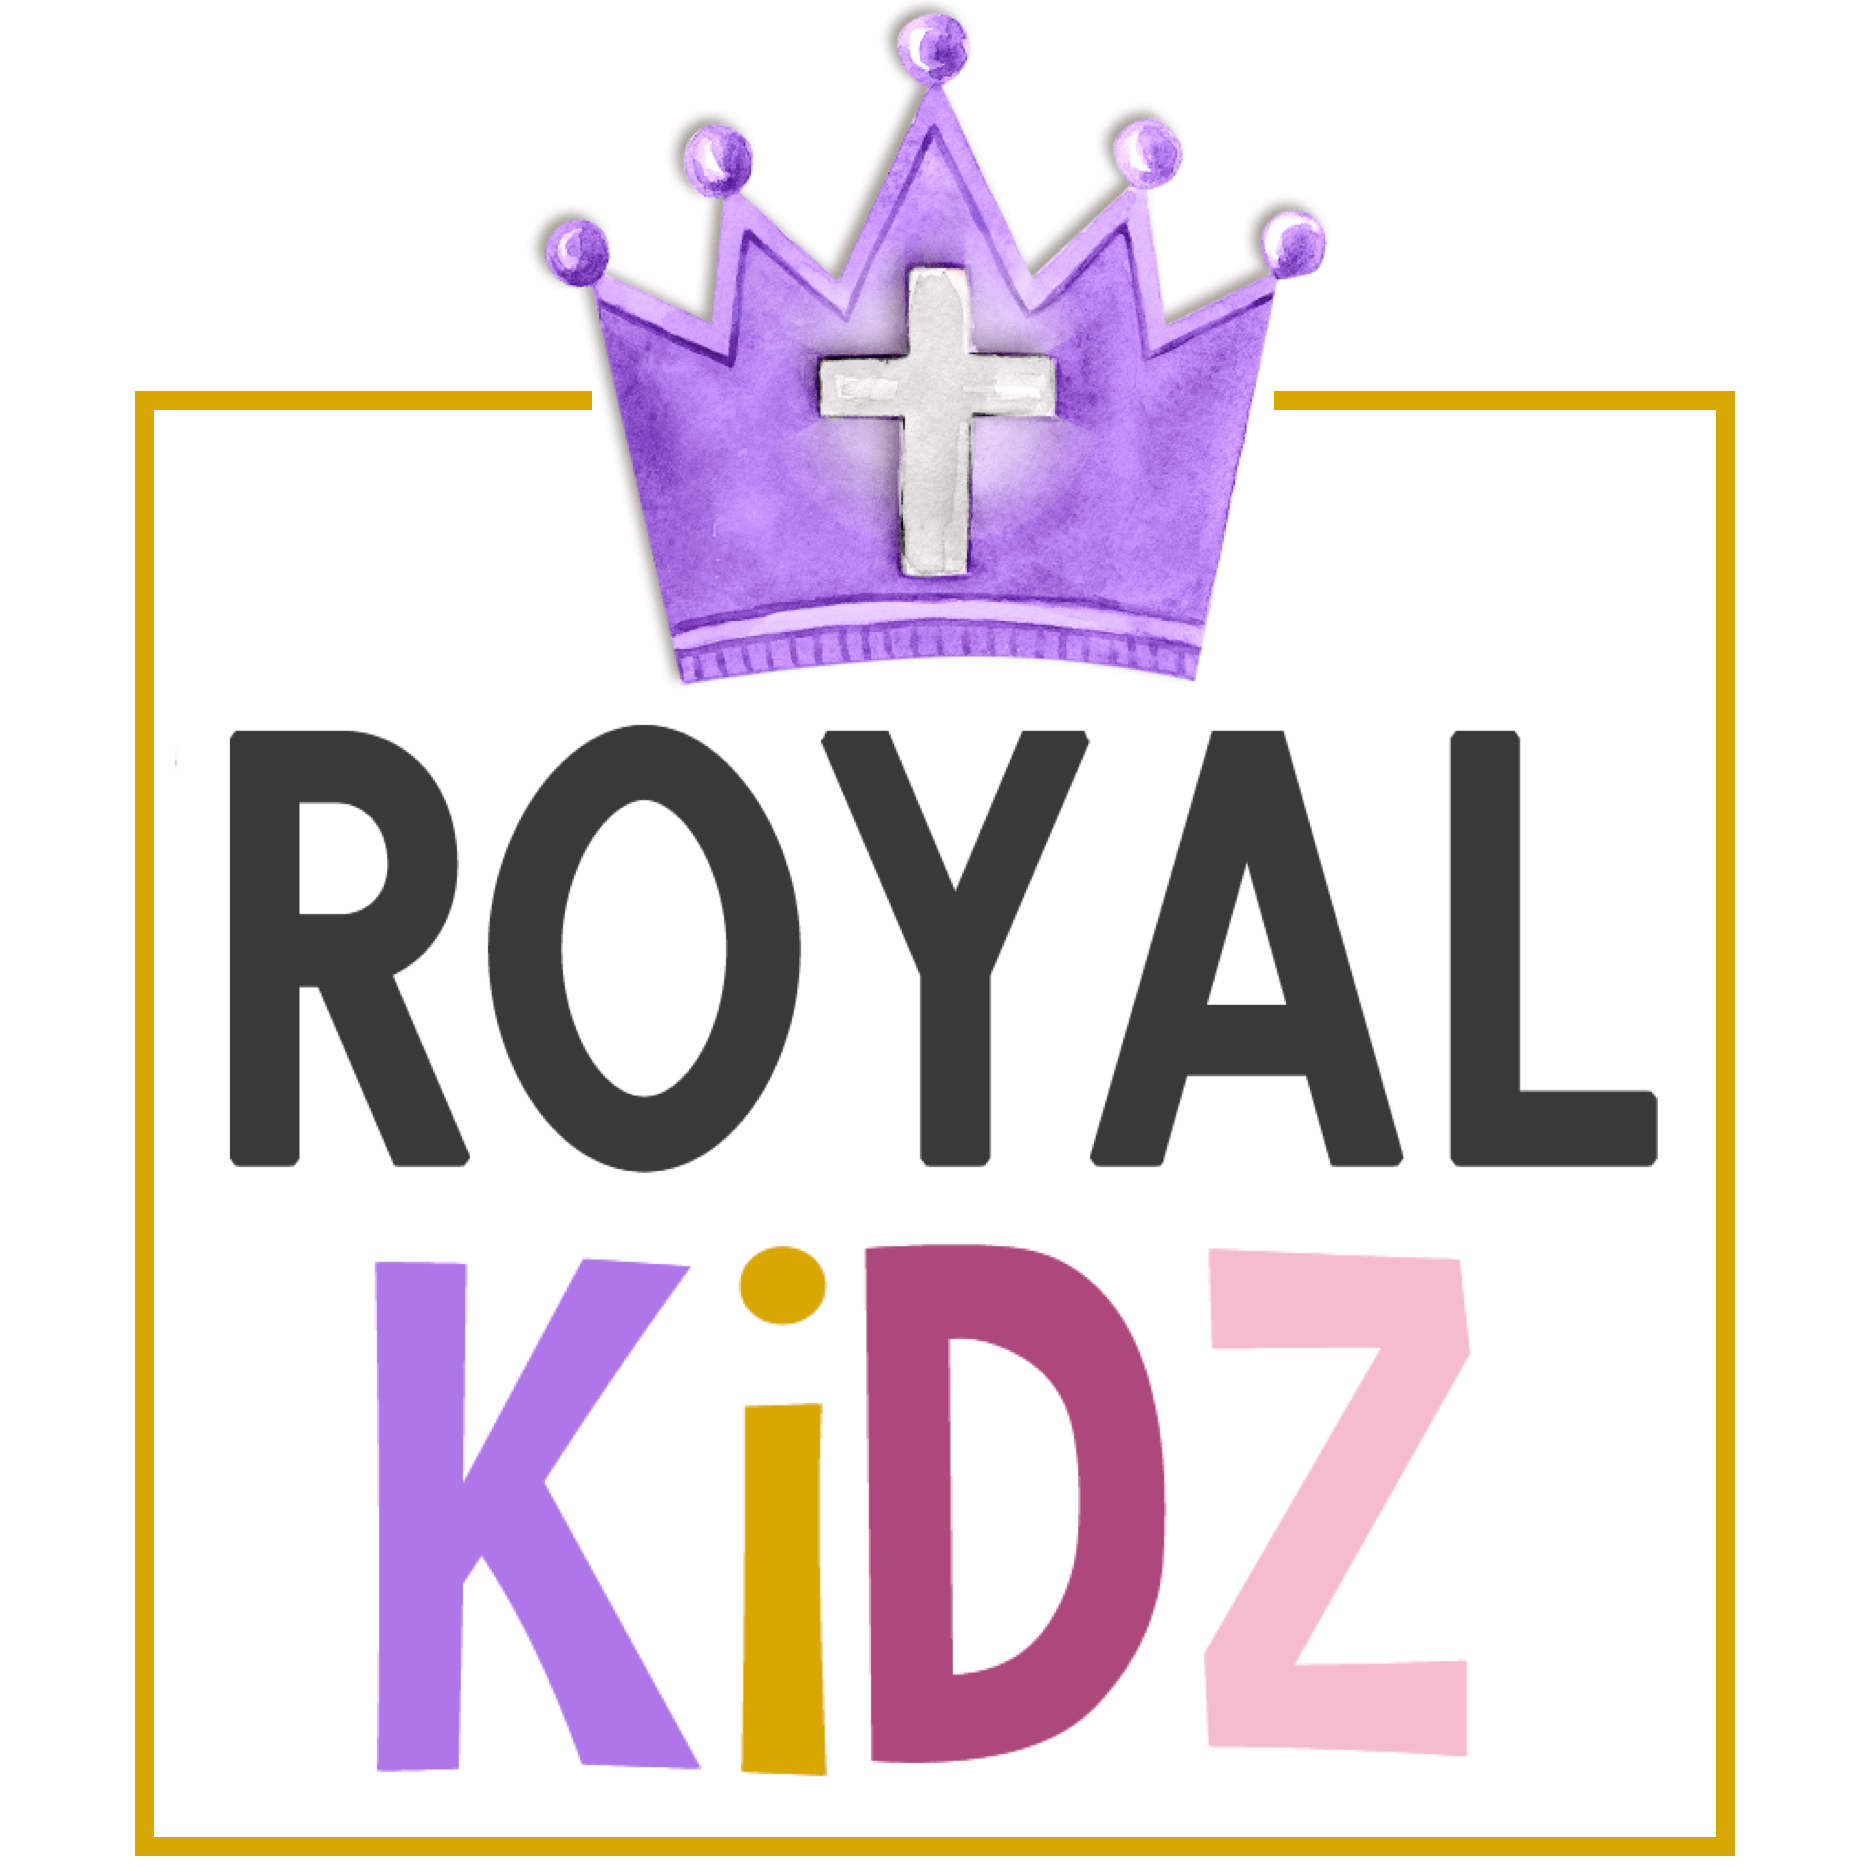 Special Needs Ministry Resources Royal Kidz Adapted Bible Curriculum